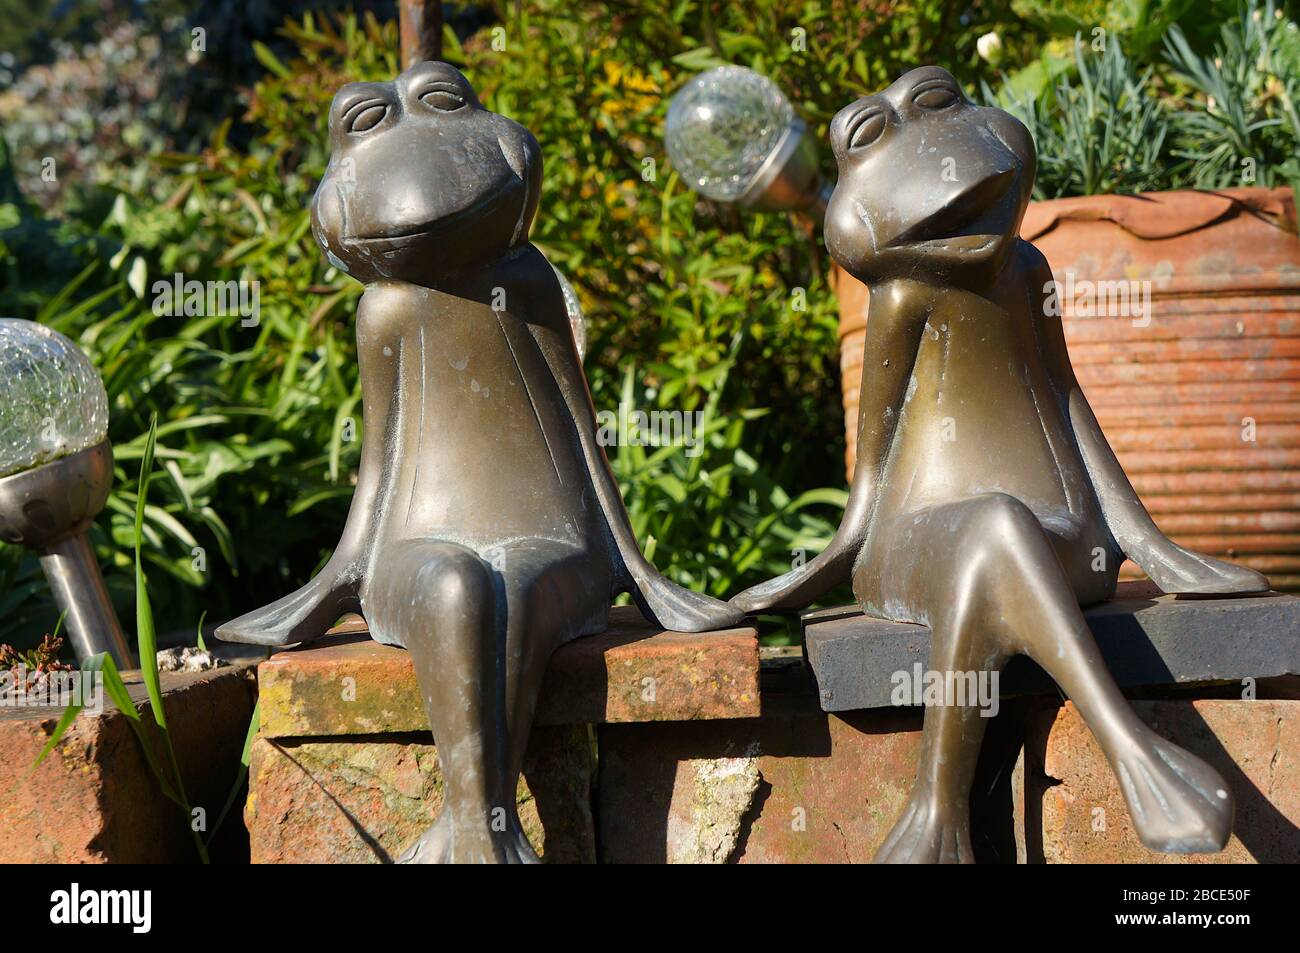 frog garden ornaments sitting on edge of the flower bed with soft focus background Stock Photo